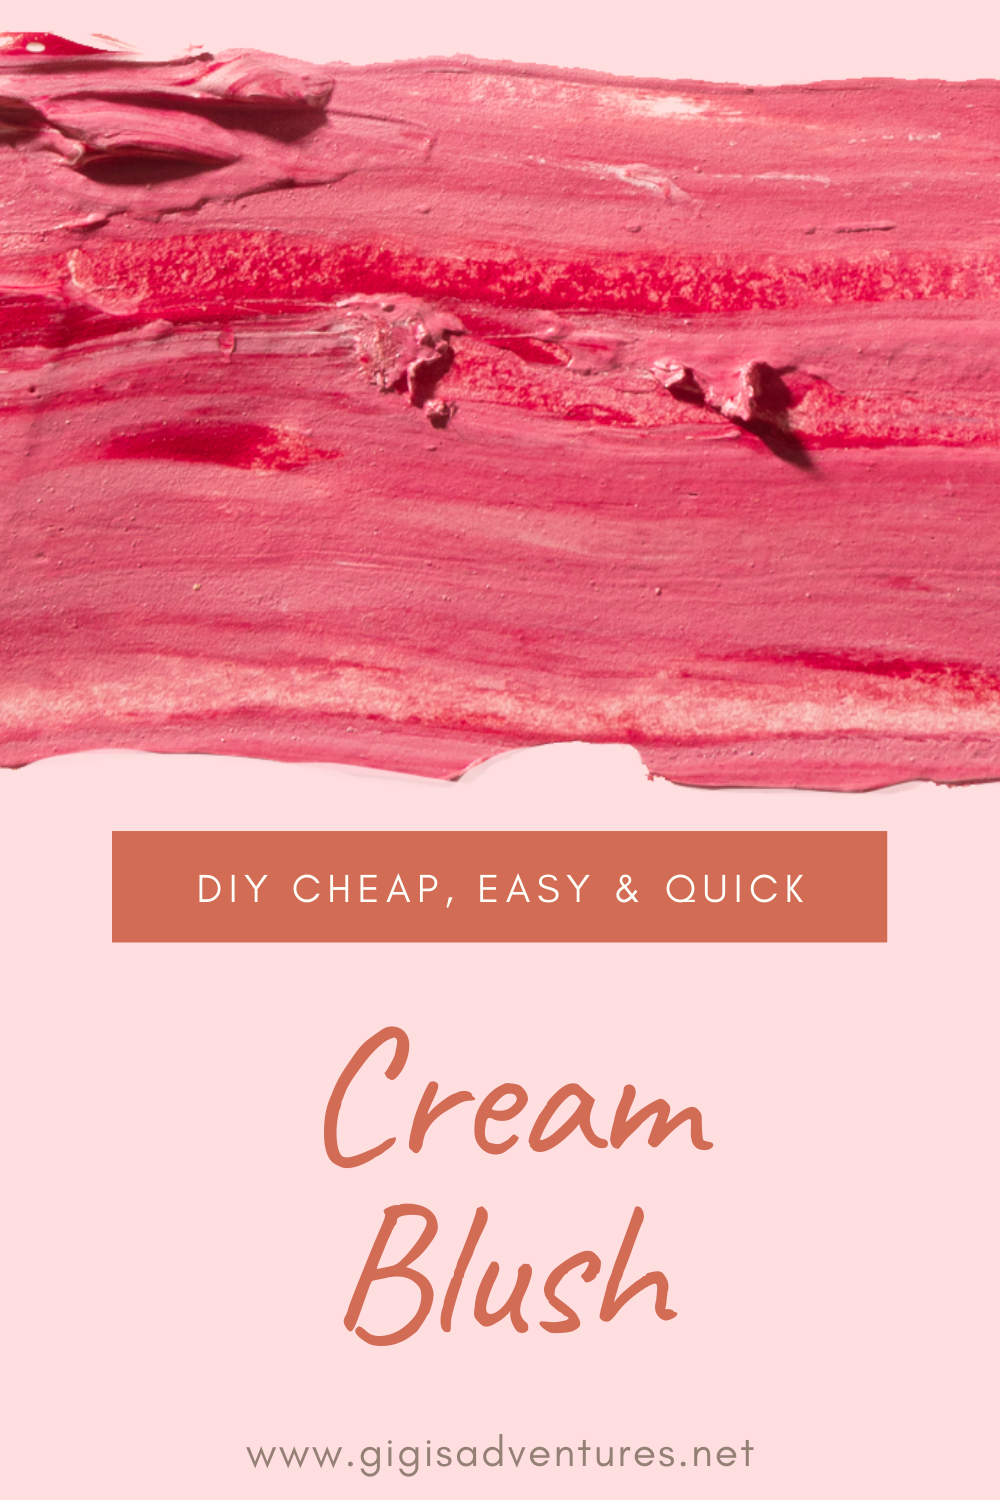 DIY 2-Ingredients Cream Blush - Super Cheap, Easy and Quick to Make!